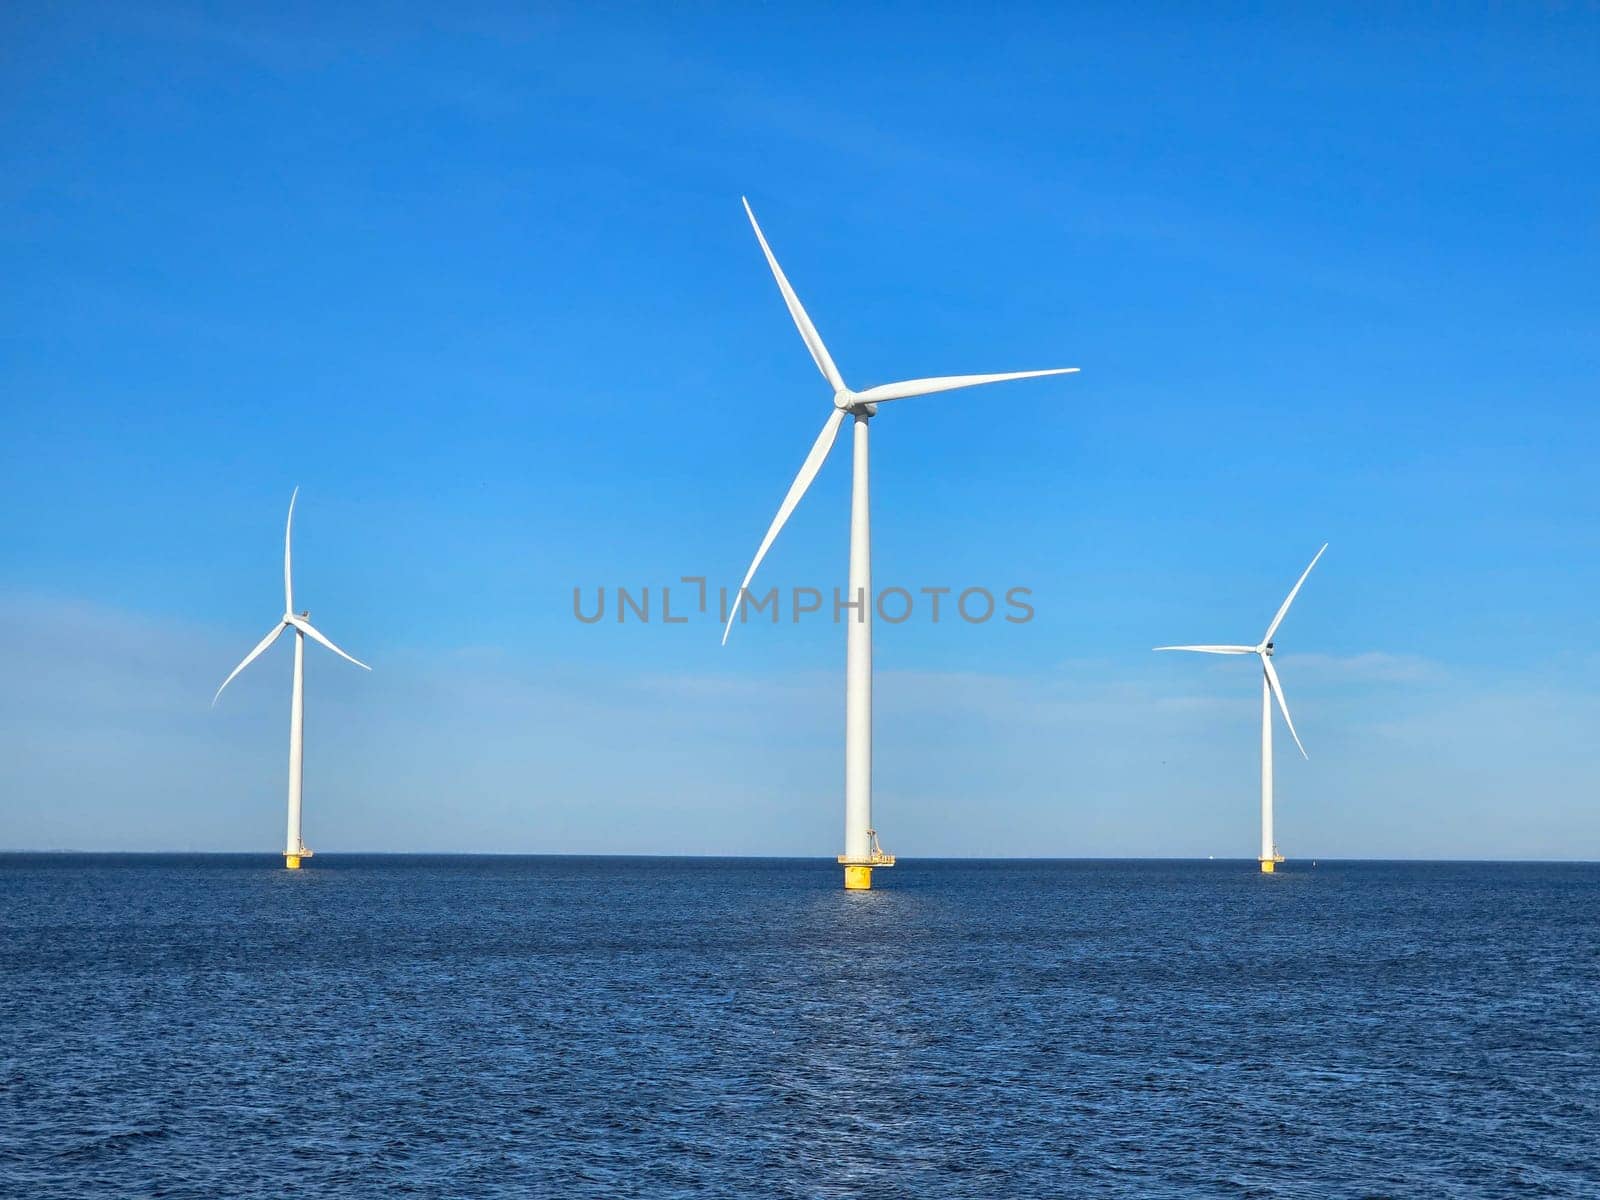 Windmill park in the ocean, view of windmill turbines on a Dutch dike generating green energy electrically, windmills isolated at sea in the Netherlands. Energy transition, zero emissions